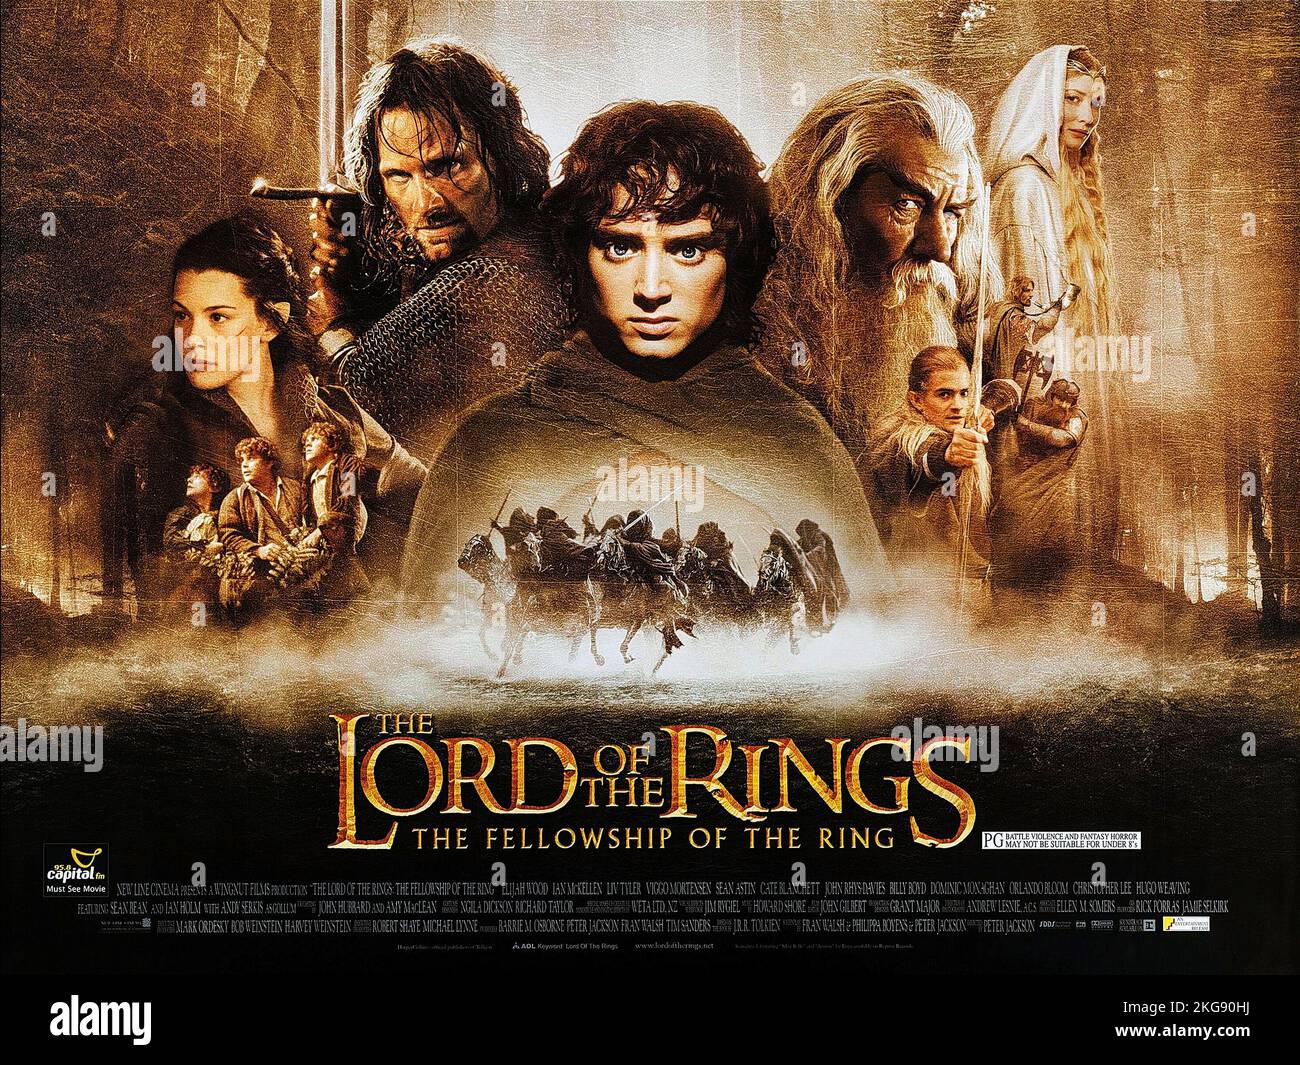 The Lord Of The Rings: The Fellowship Of The Ring  Poster Stock Photo